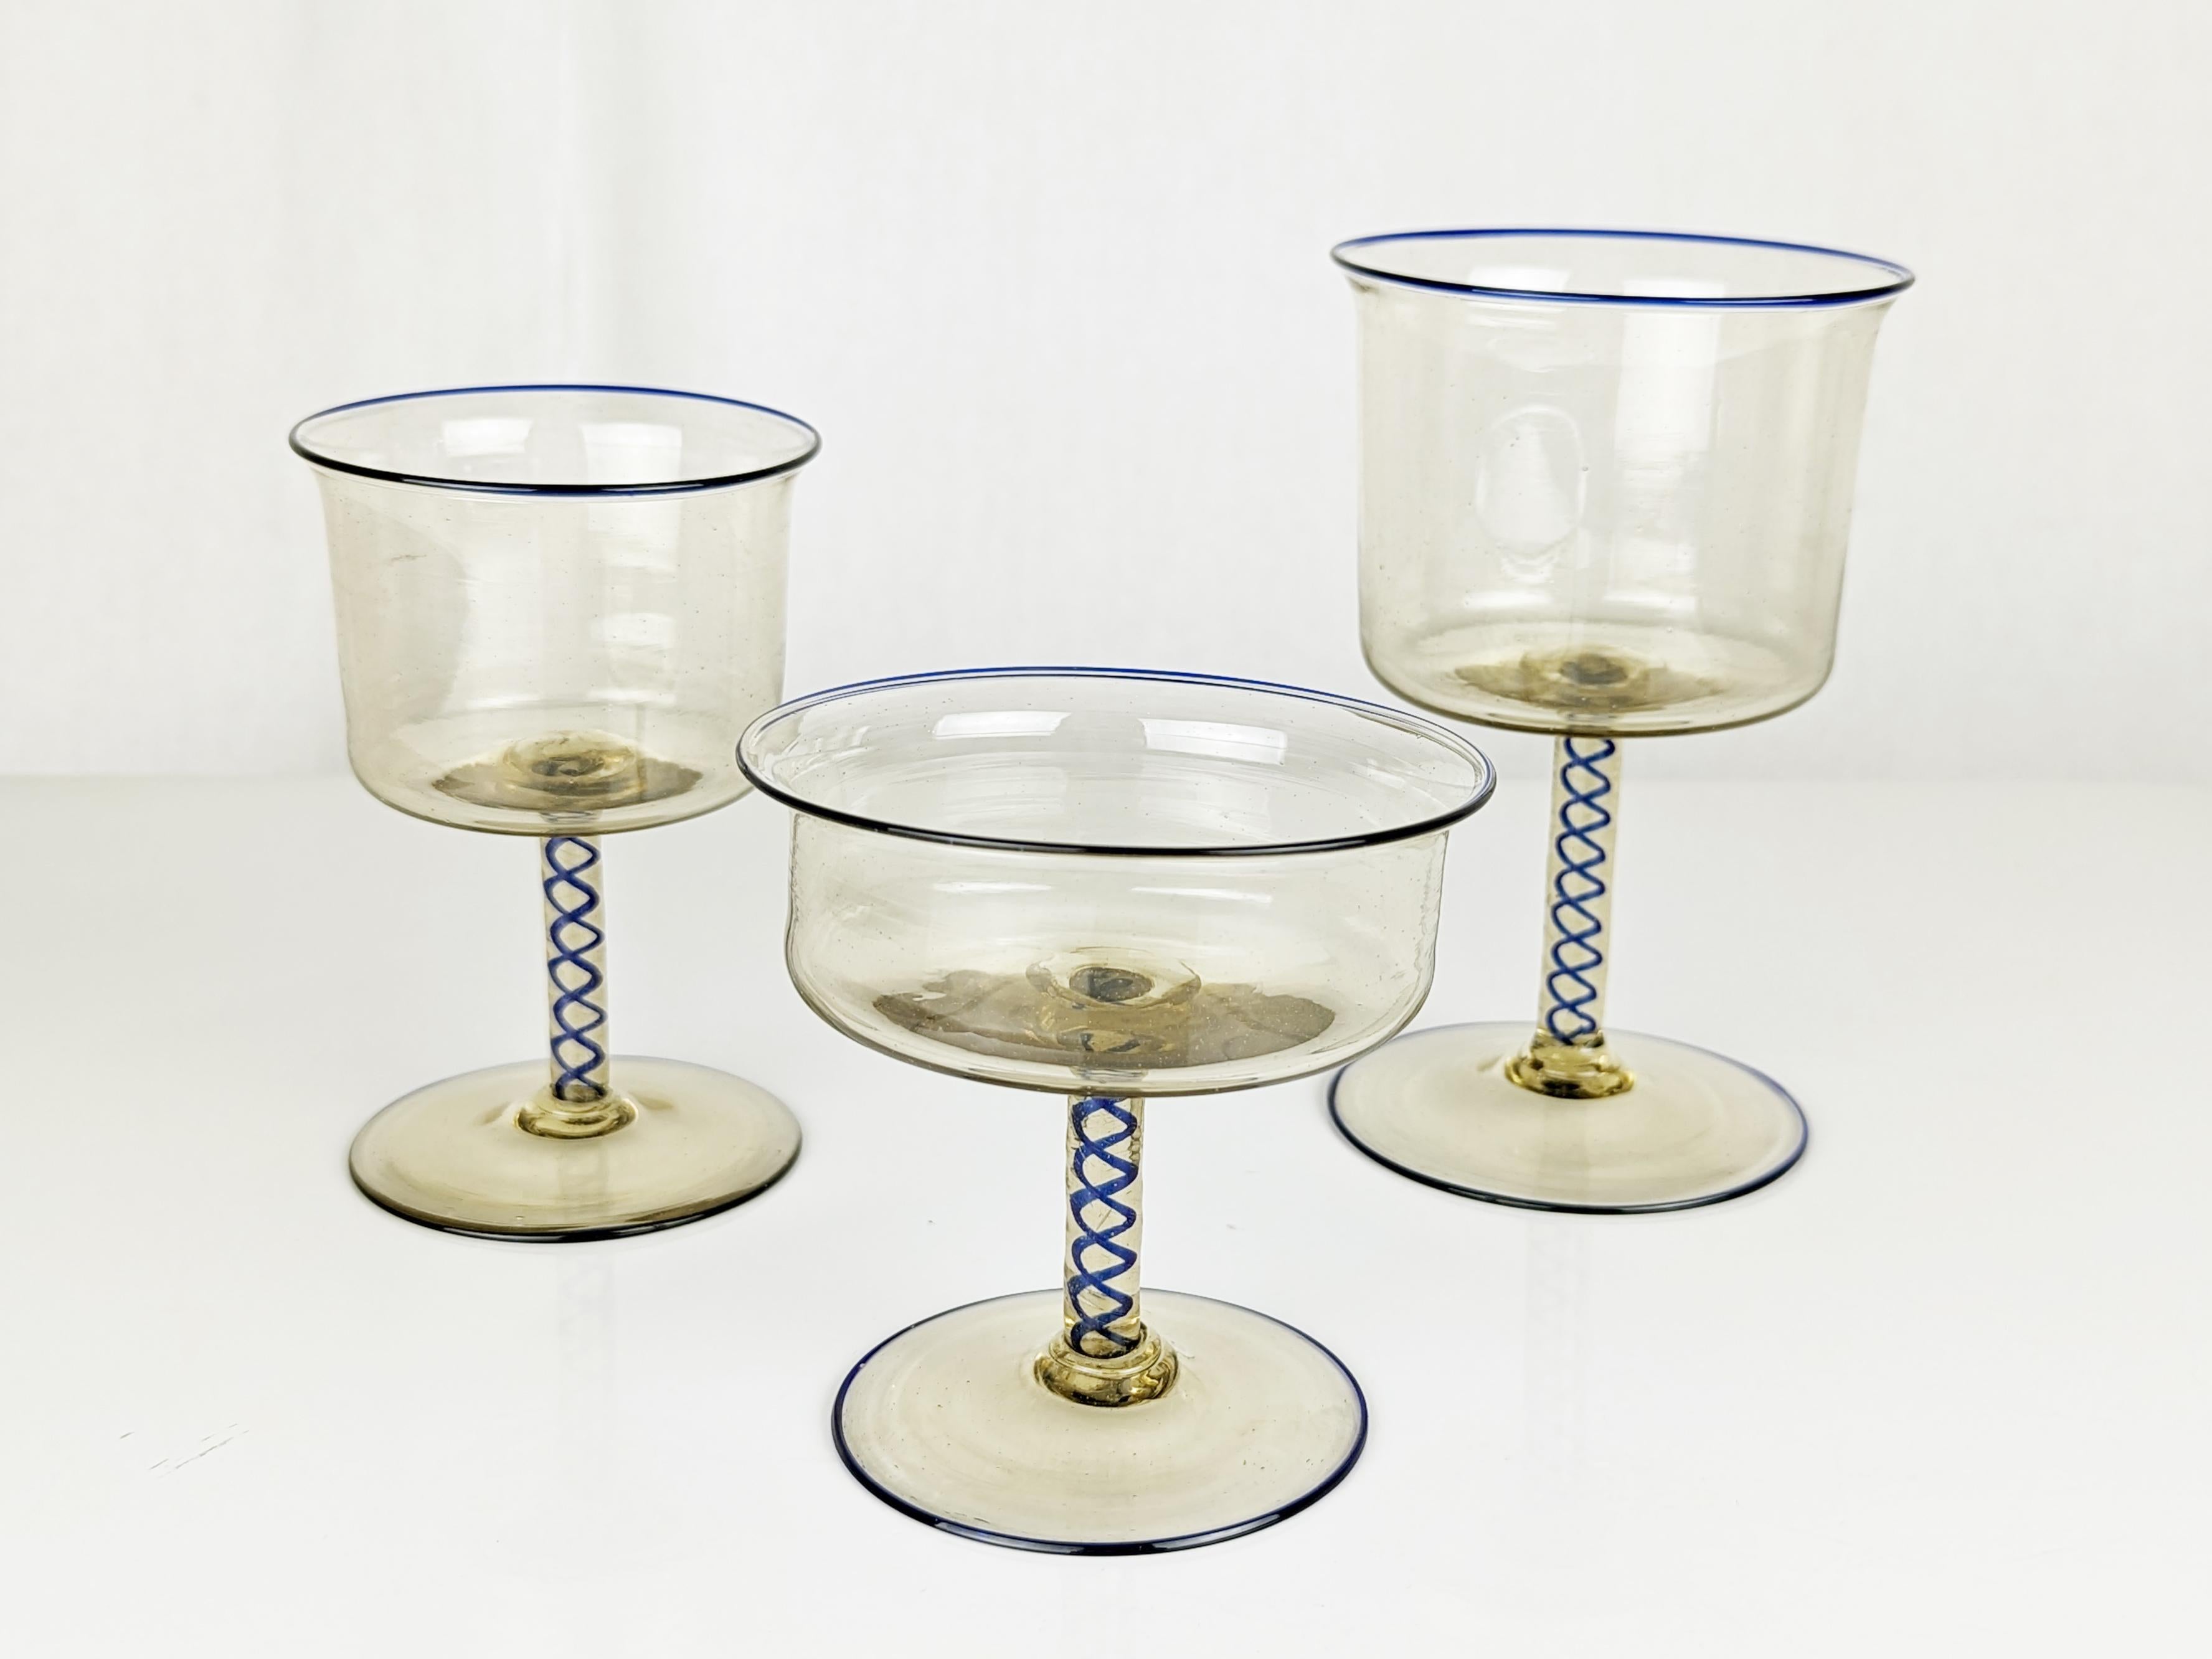 Set of 18 Murano glass goblets manufactured by Vittorio Zecchin for the Murano glasswork Pauly & co in the 1930s.
The set is composed by 3 different glass dimensions ( cm 14h x 8,7;  cm 11,5h x 7,7d; cm 9,3h x 9,3d ) and belongs to the 1930s